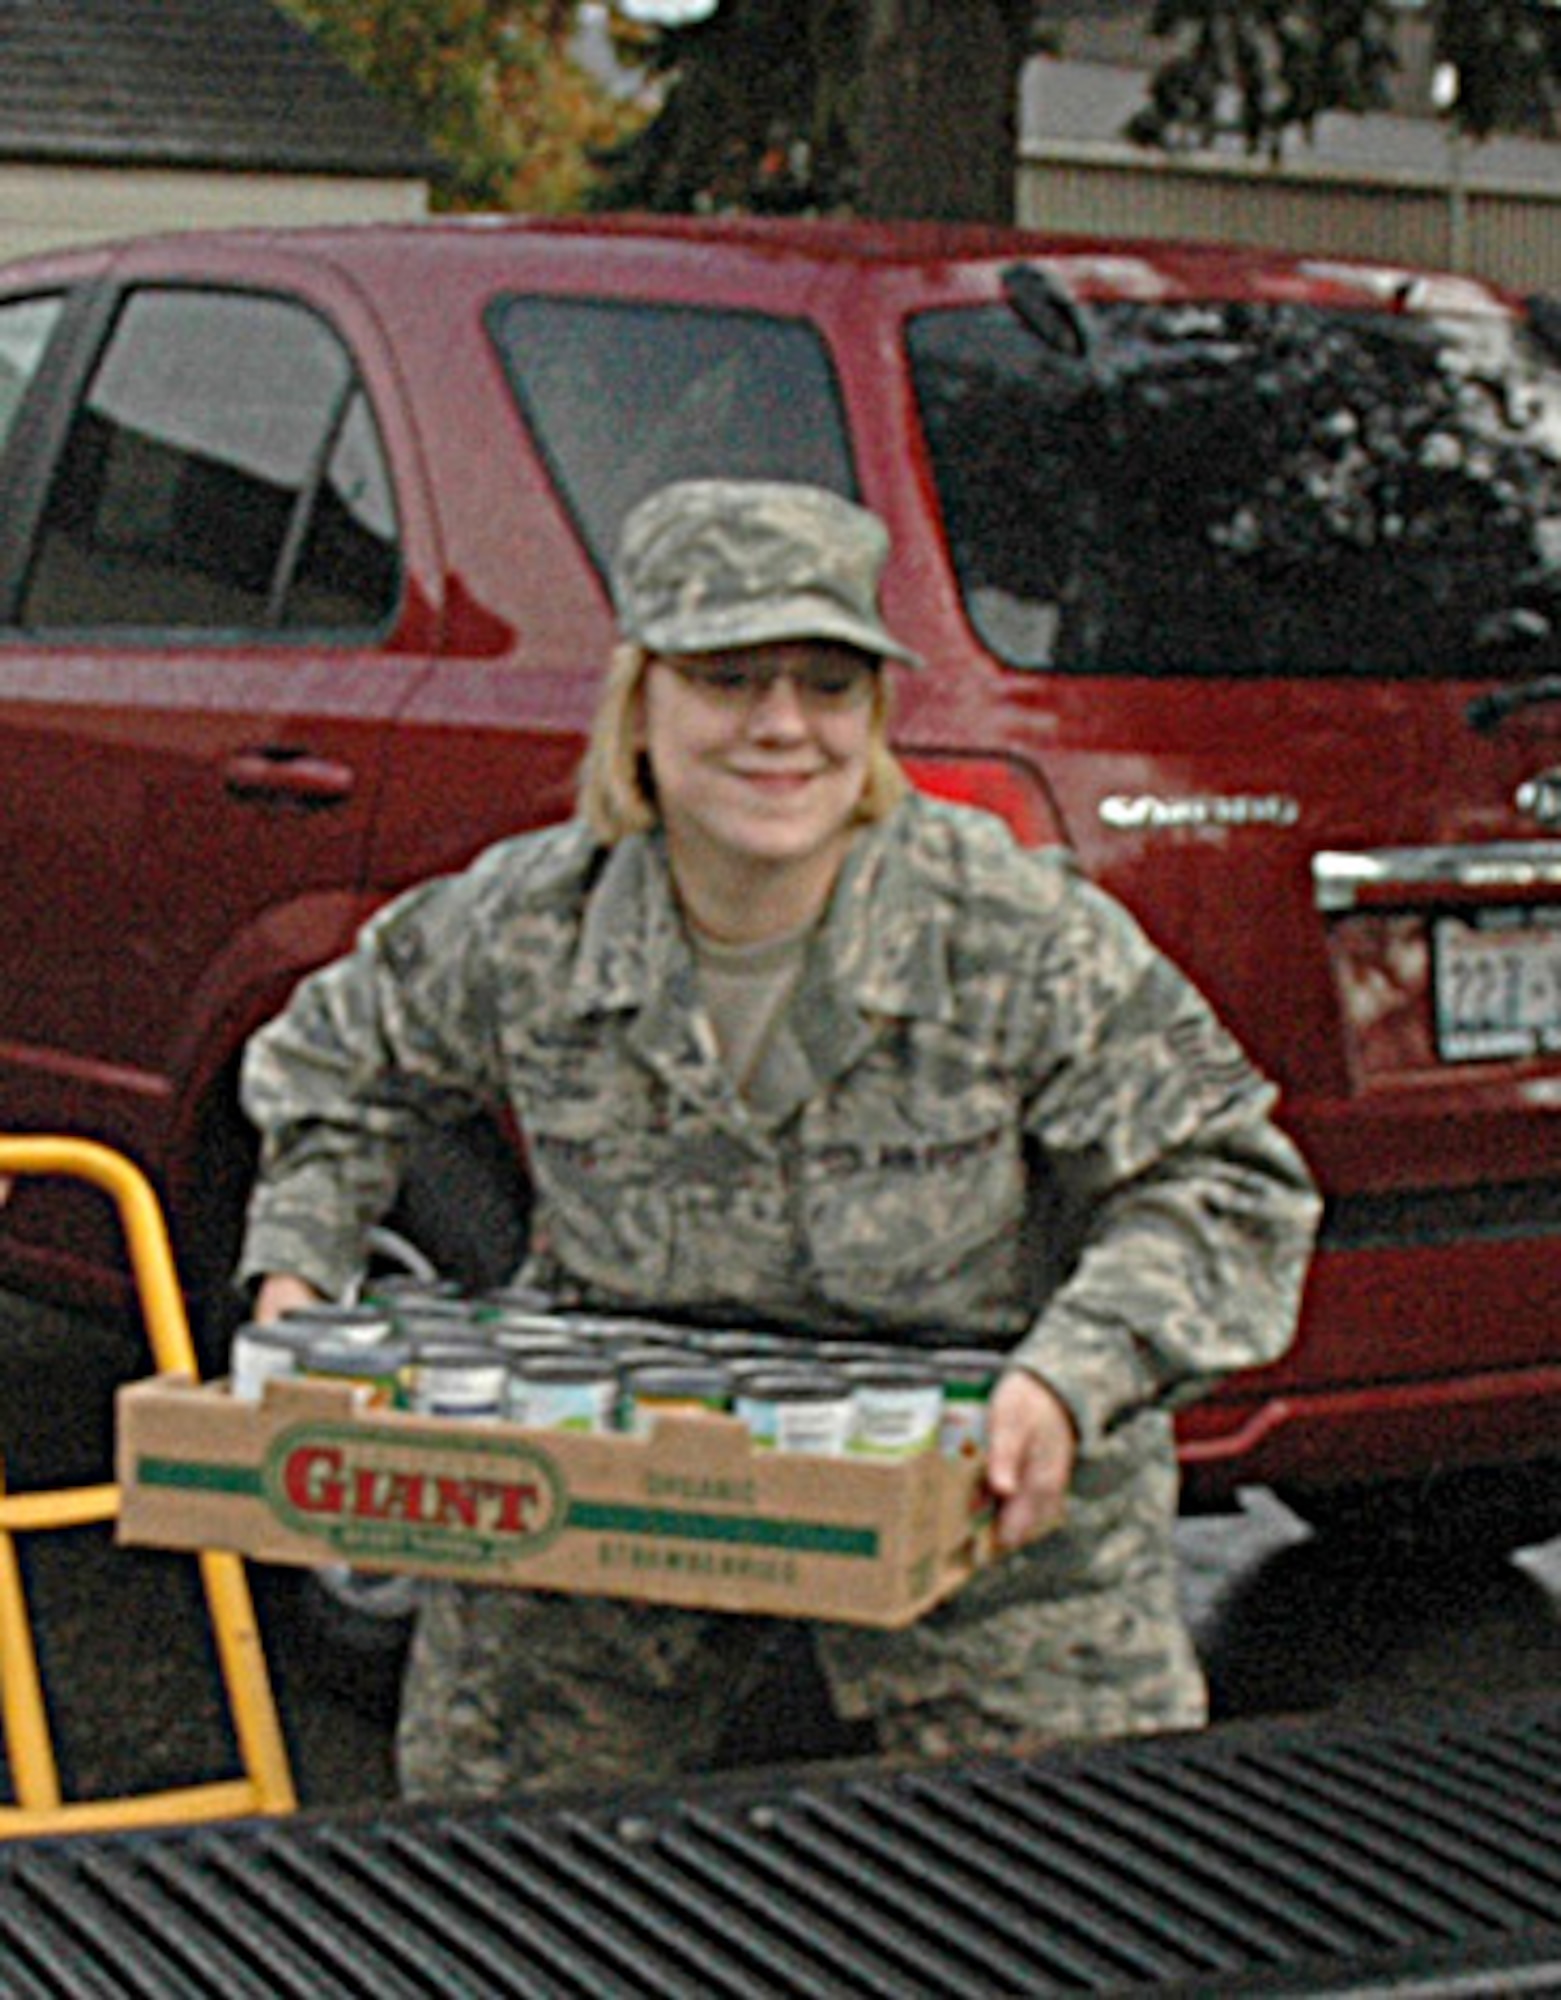 MCCHORD AIR FORCE BASE, Wash., - Tech. Sgt. Suzanne Kyes, 446th Mission Support Squadron's Airmen & Family Readiness Center here, loads a box of donated canned goods onto a truck. The Puget Sound USO McChord Center donated traditional Thanksgiving food for 54 Reserve families in the 446th Airlift Wing. (U.S. Air Force photo/Sandra Pishner)